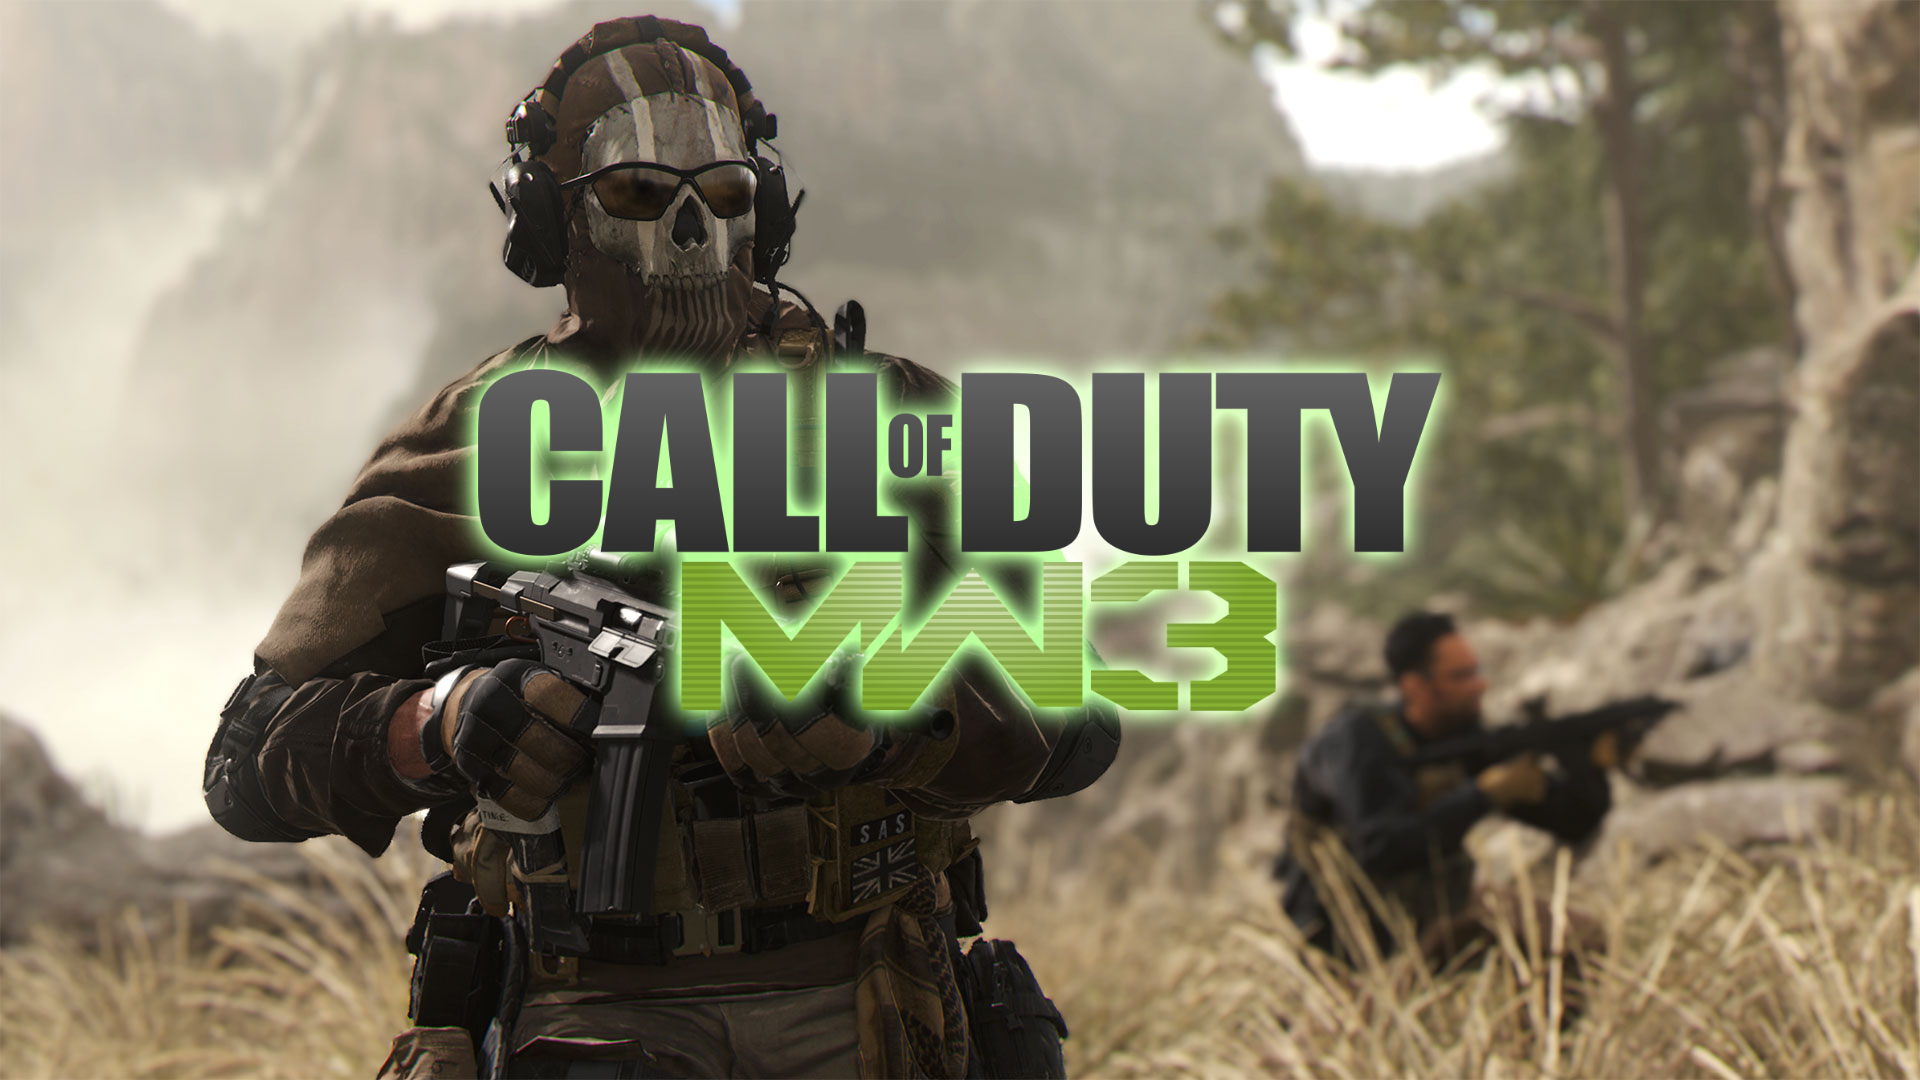 Call Of Duty: Modern Warfare 3 release date and multiplayer launch